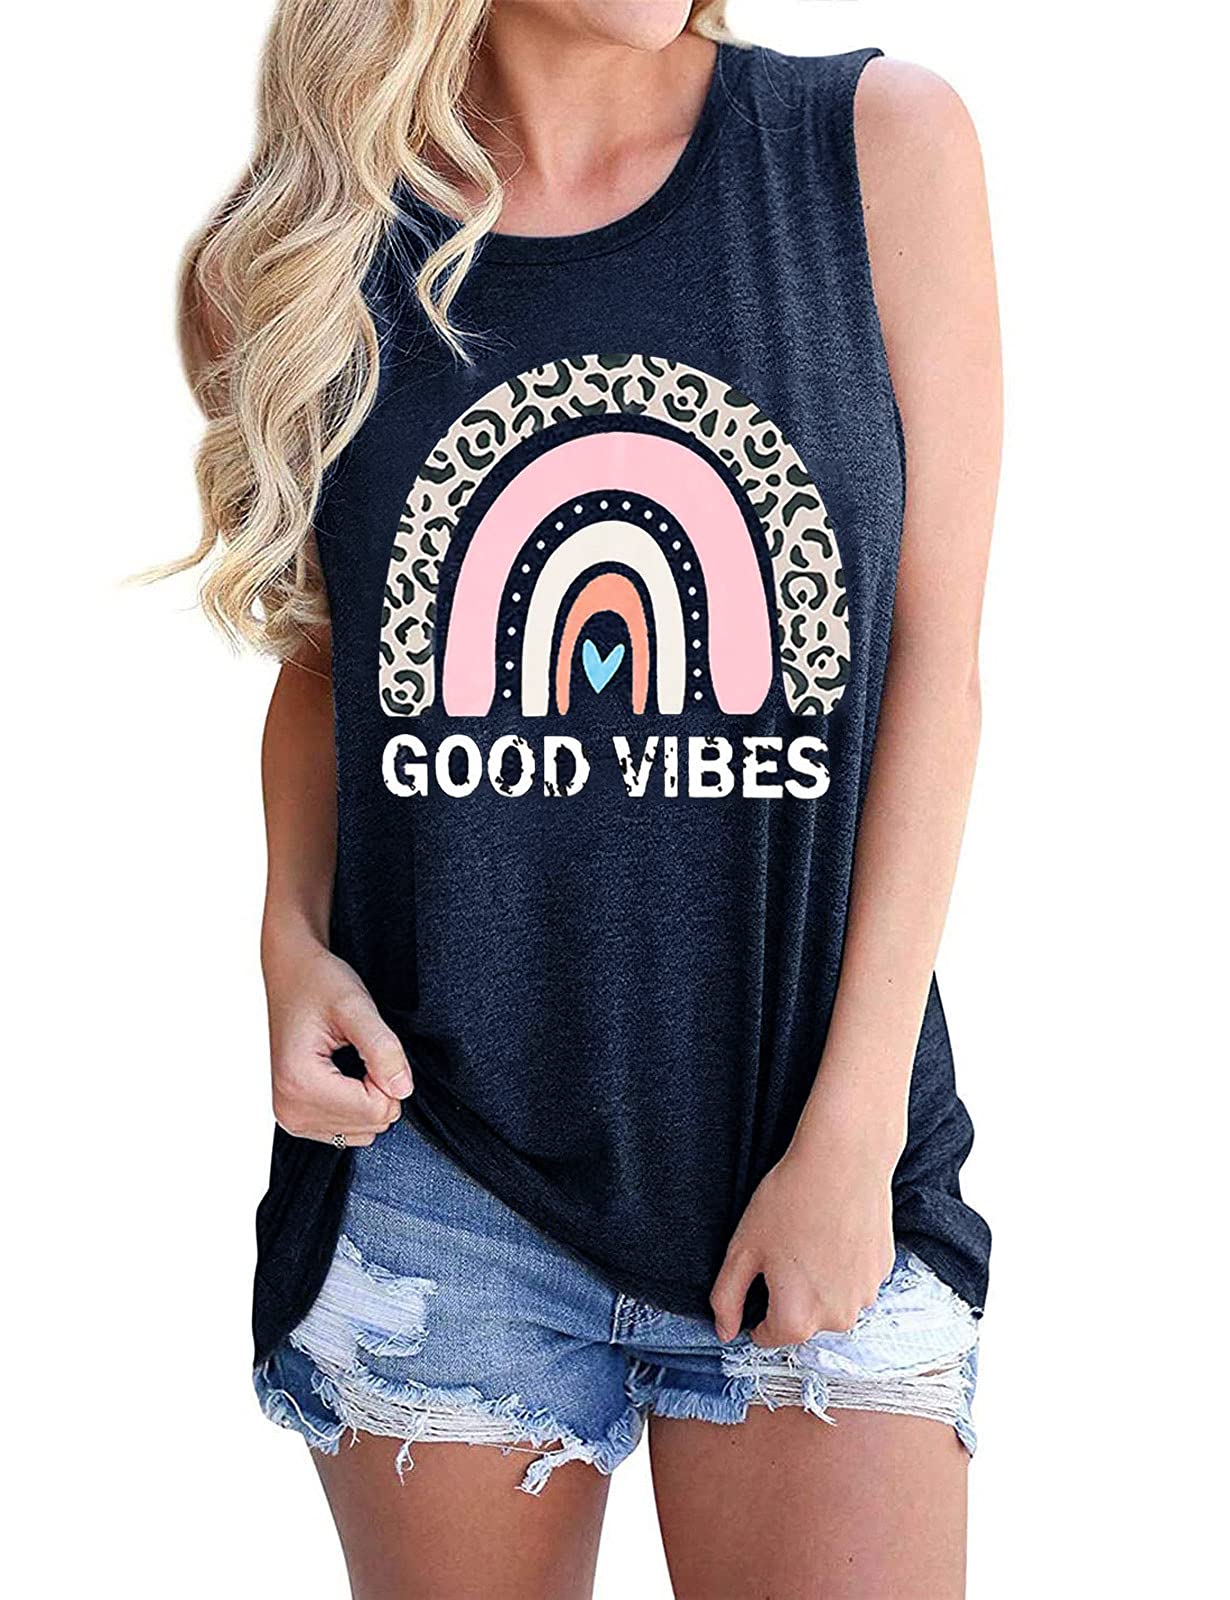 Book Cover Vaise Womens Loose Fit Graphic Tank Tops Casual Summer Tank Tops Trendy Tops Tunics Small Y-darkblue1